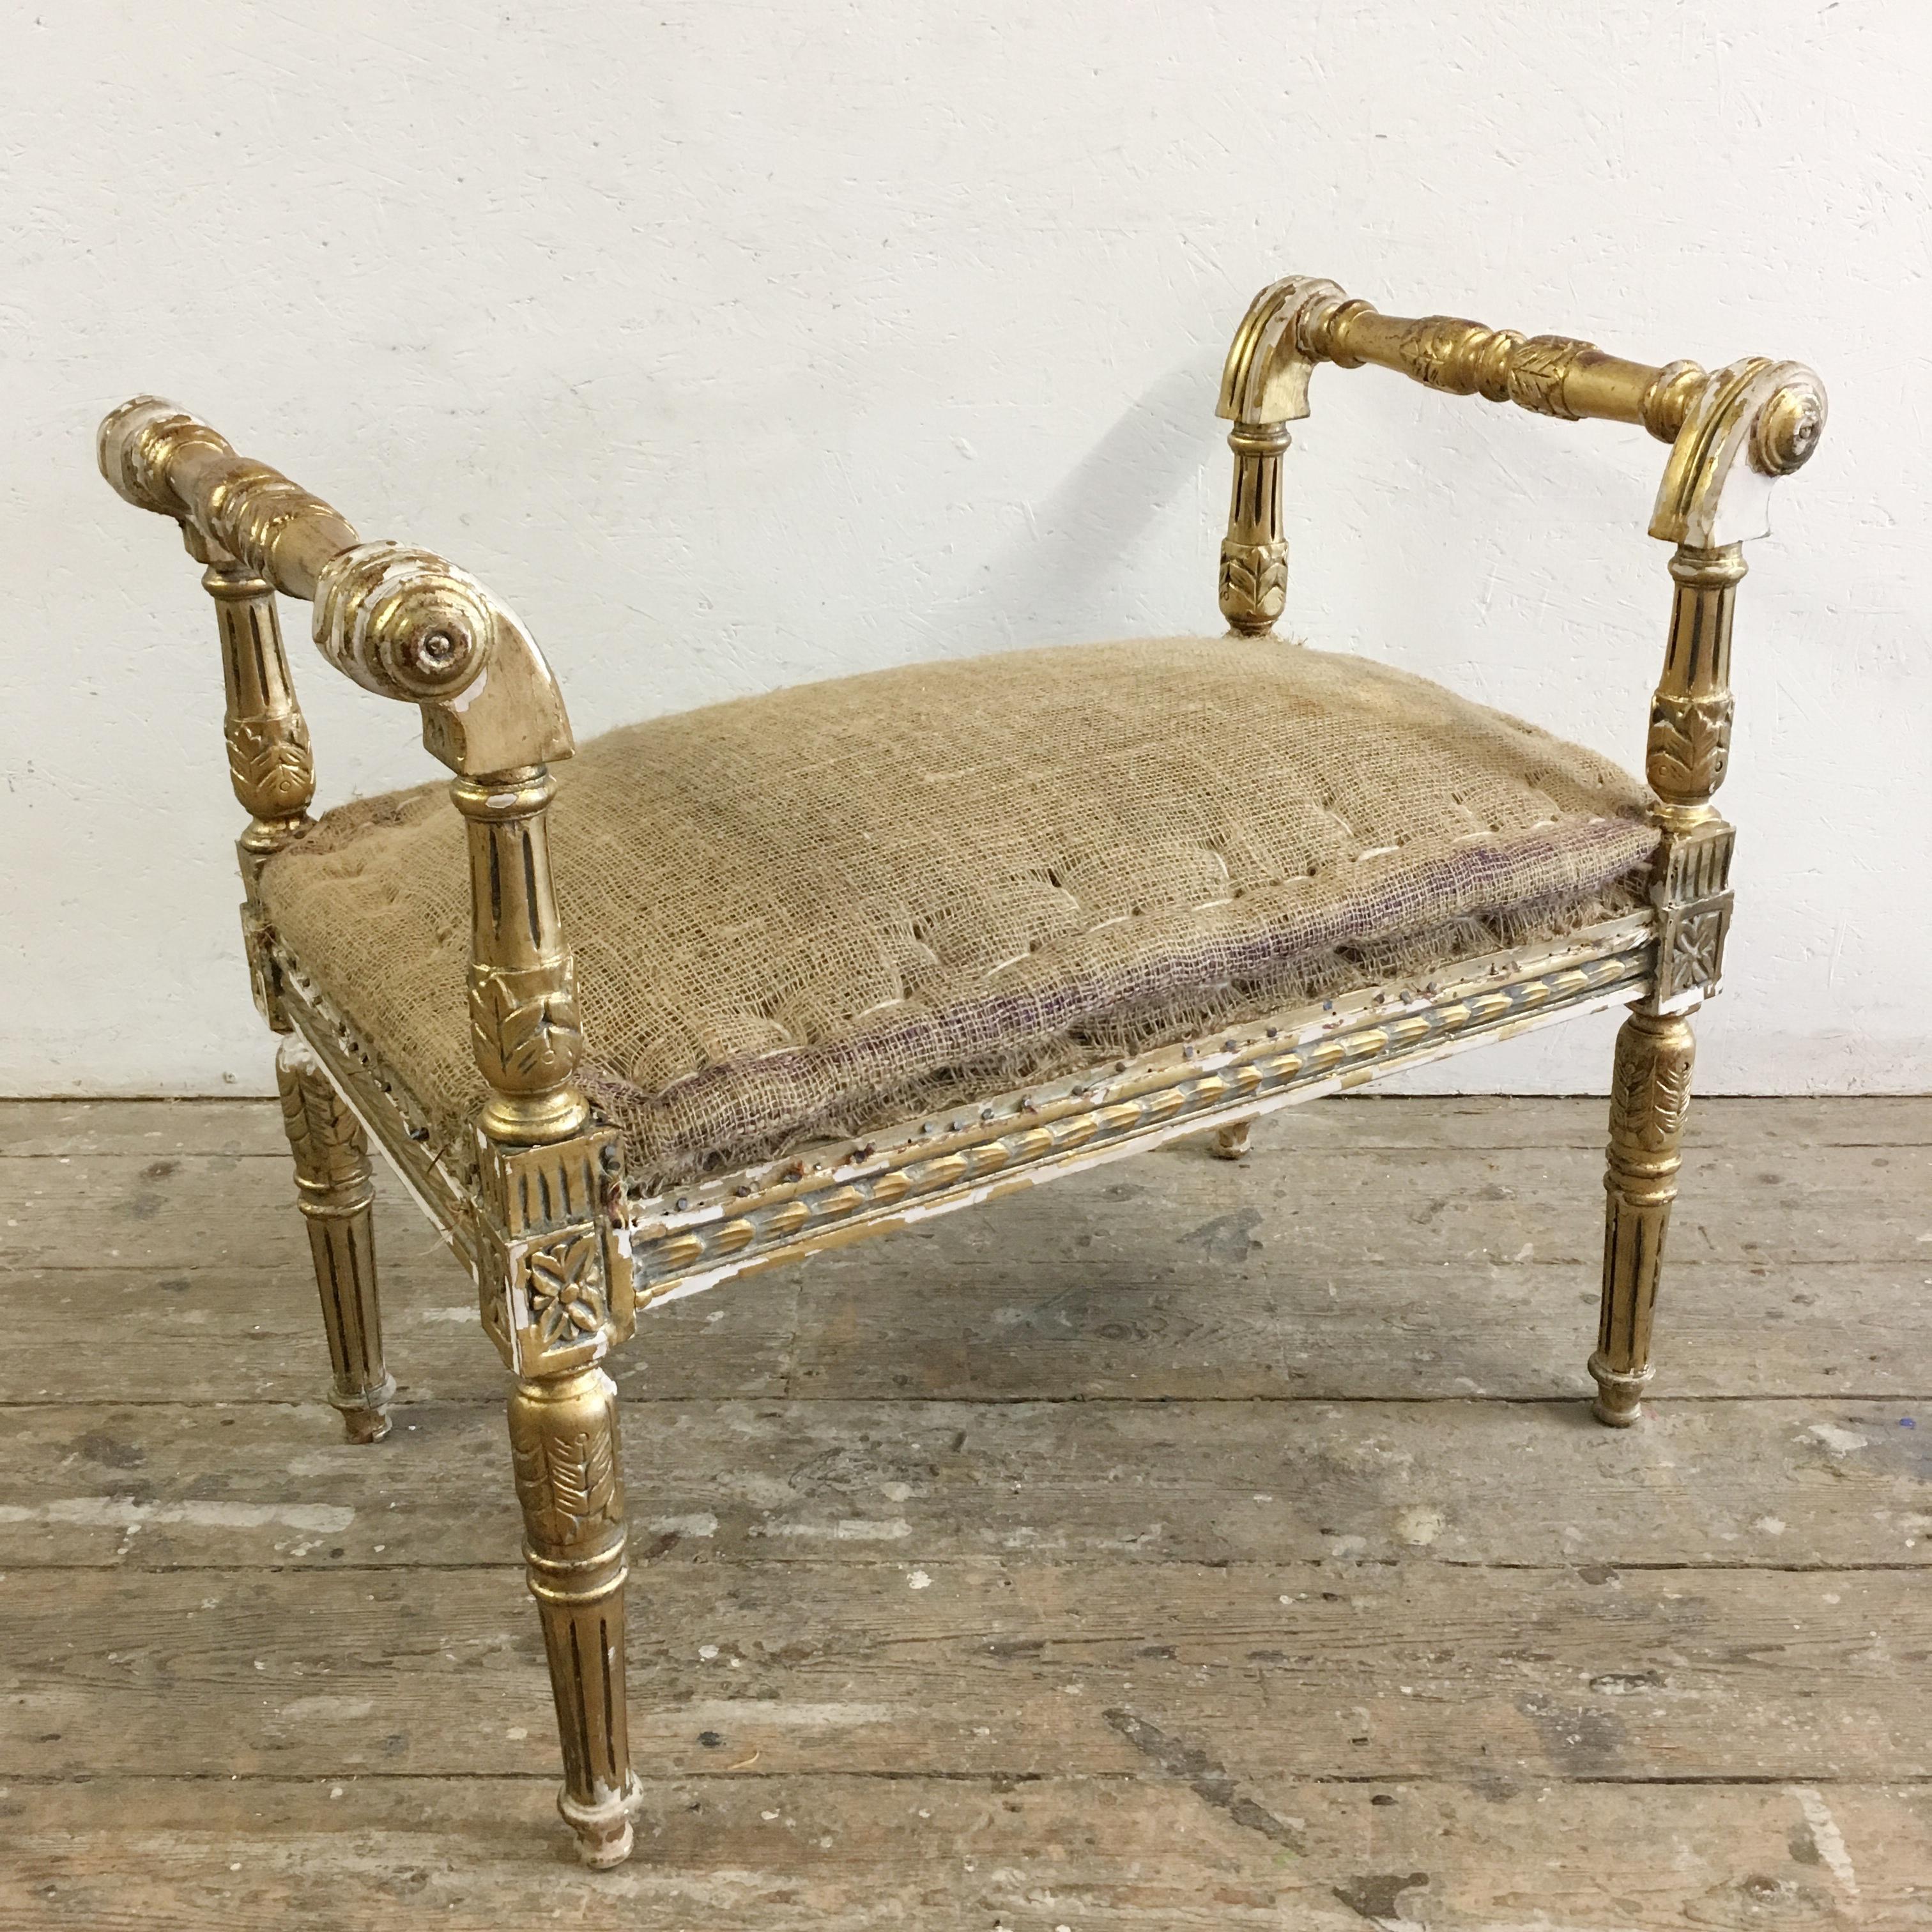 Classical French giltwood window seat. 
Louis XVI style. 
The stool has raised arms, scrolled corner details, acanthus carvings and reeded legs. 
The seat is deeply padded and extremely comfortable, it is in a hessian for immediate use as is or